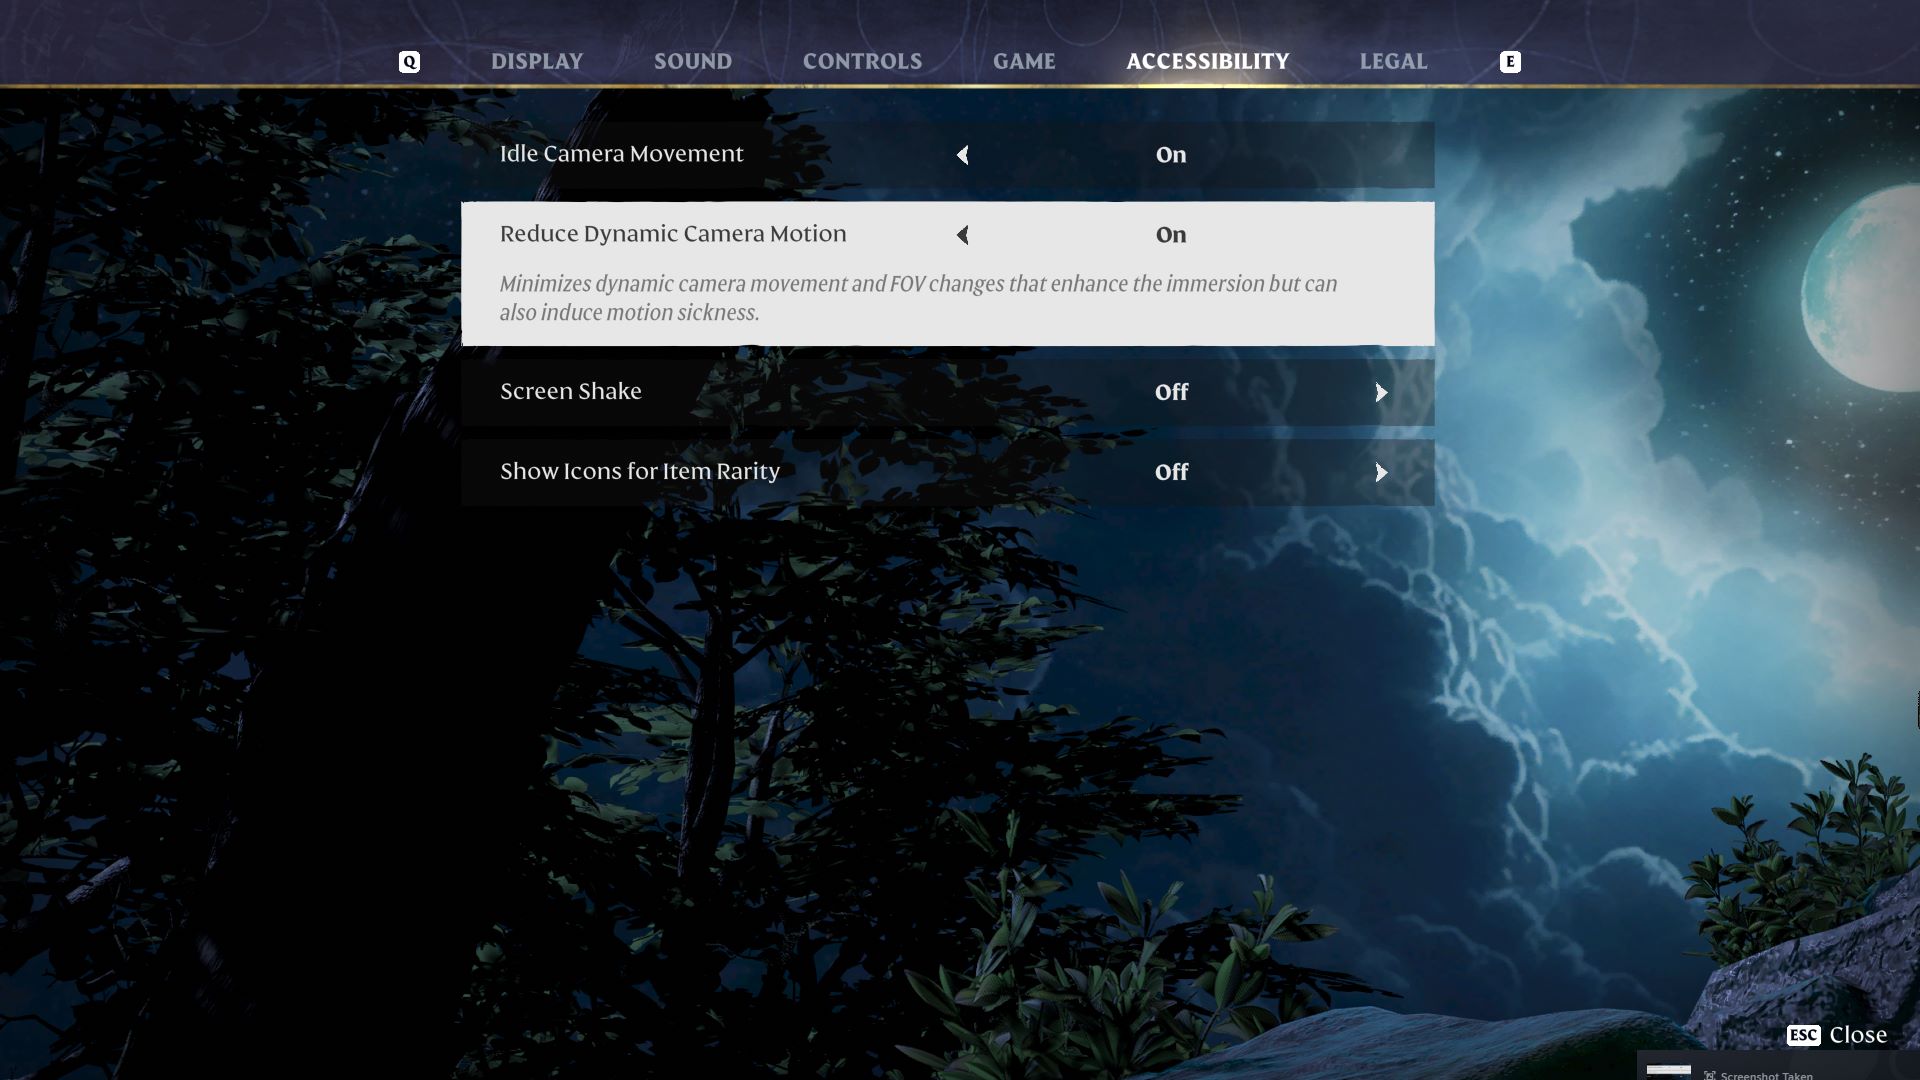 The Accessibility settings menu in Enshrouded